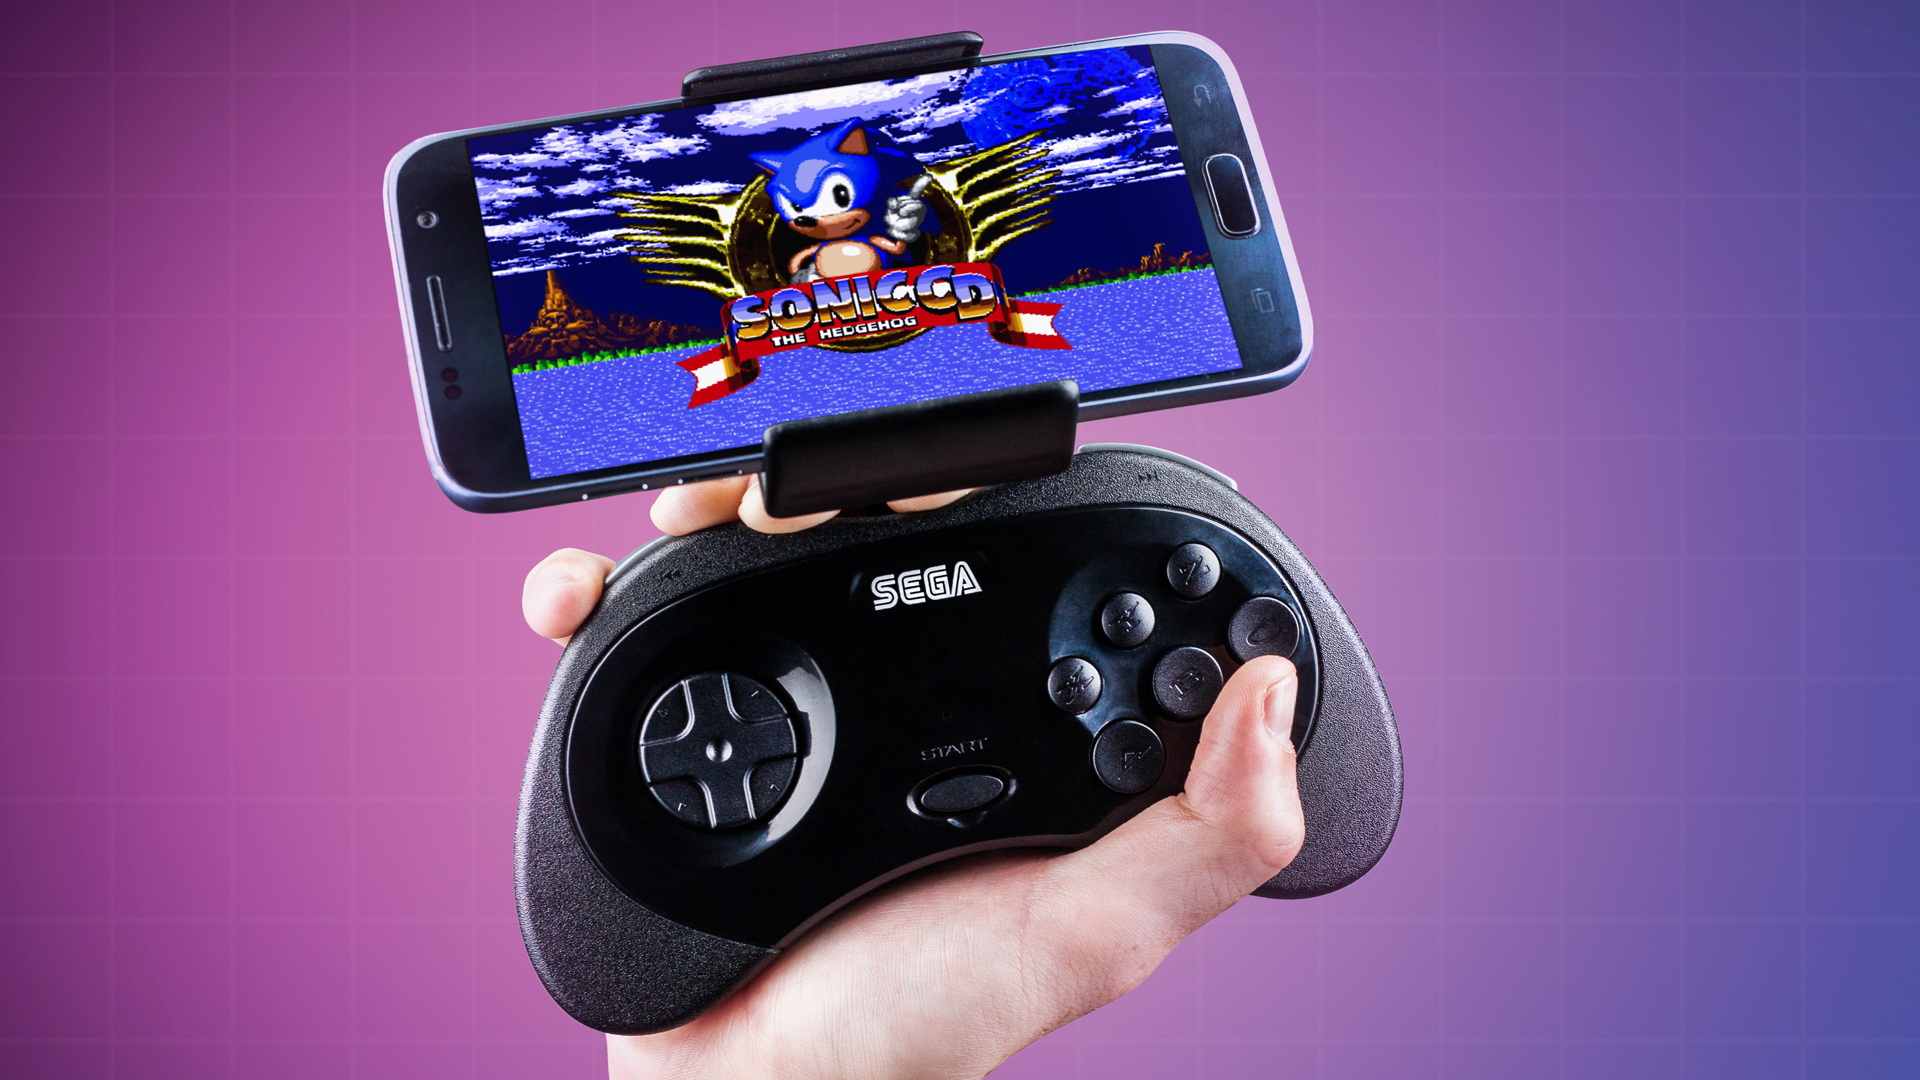 SEGA Smartphone Controller for Android Announced